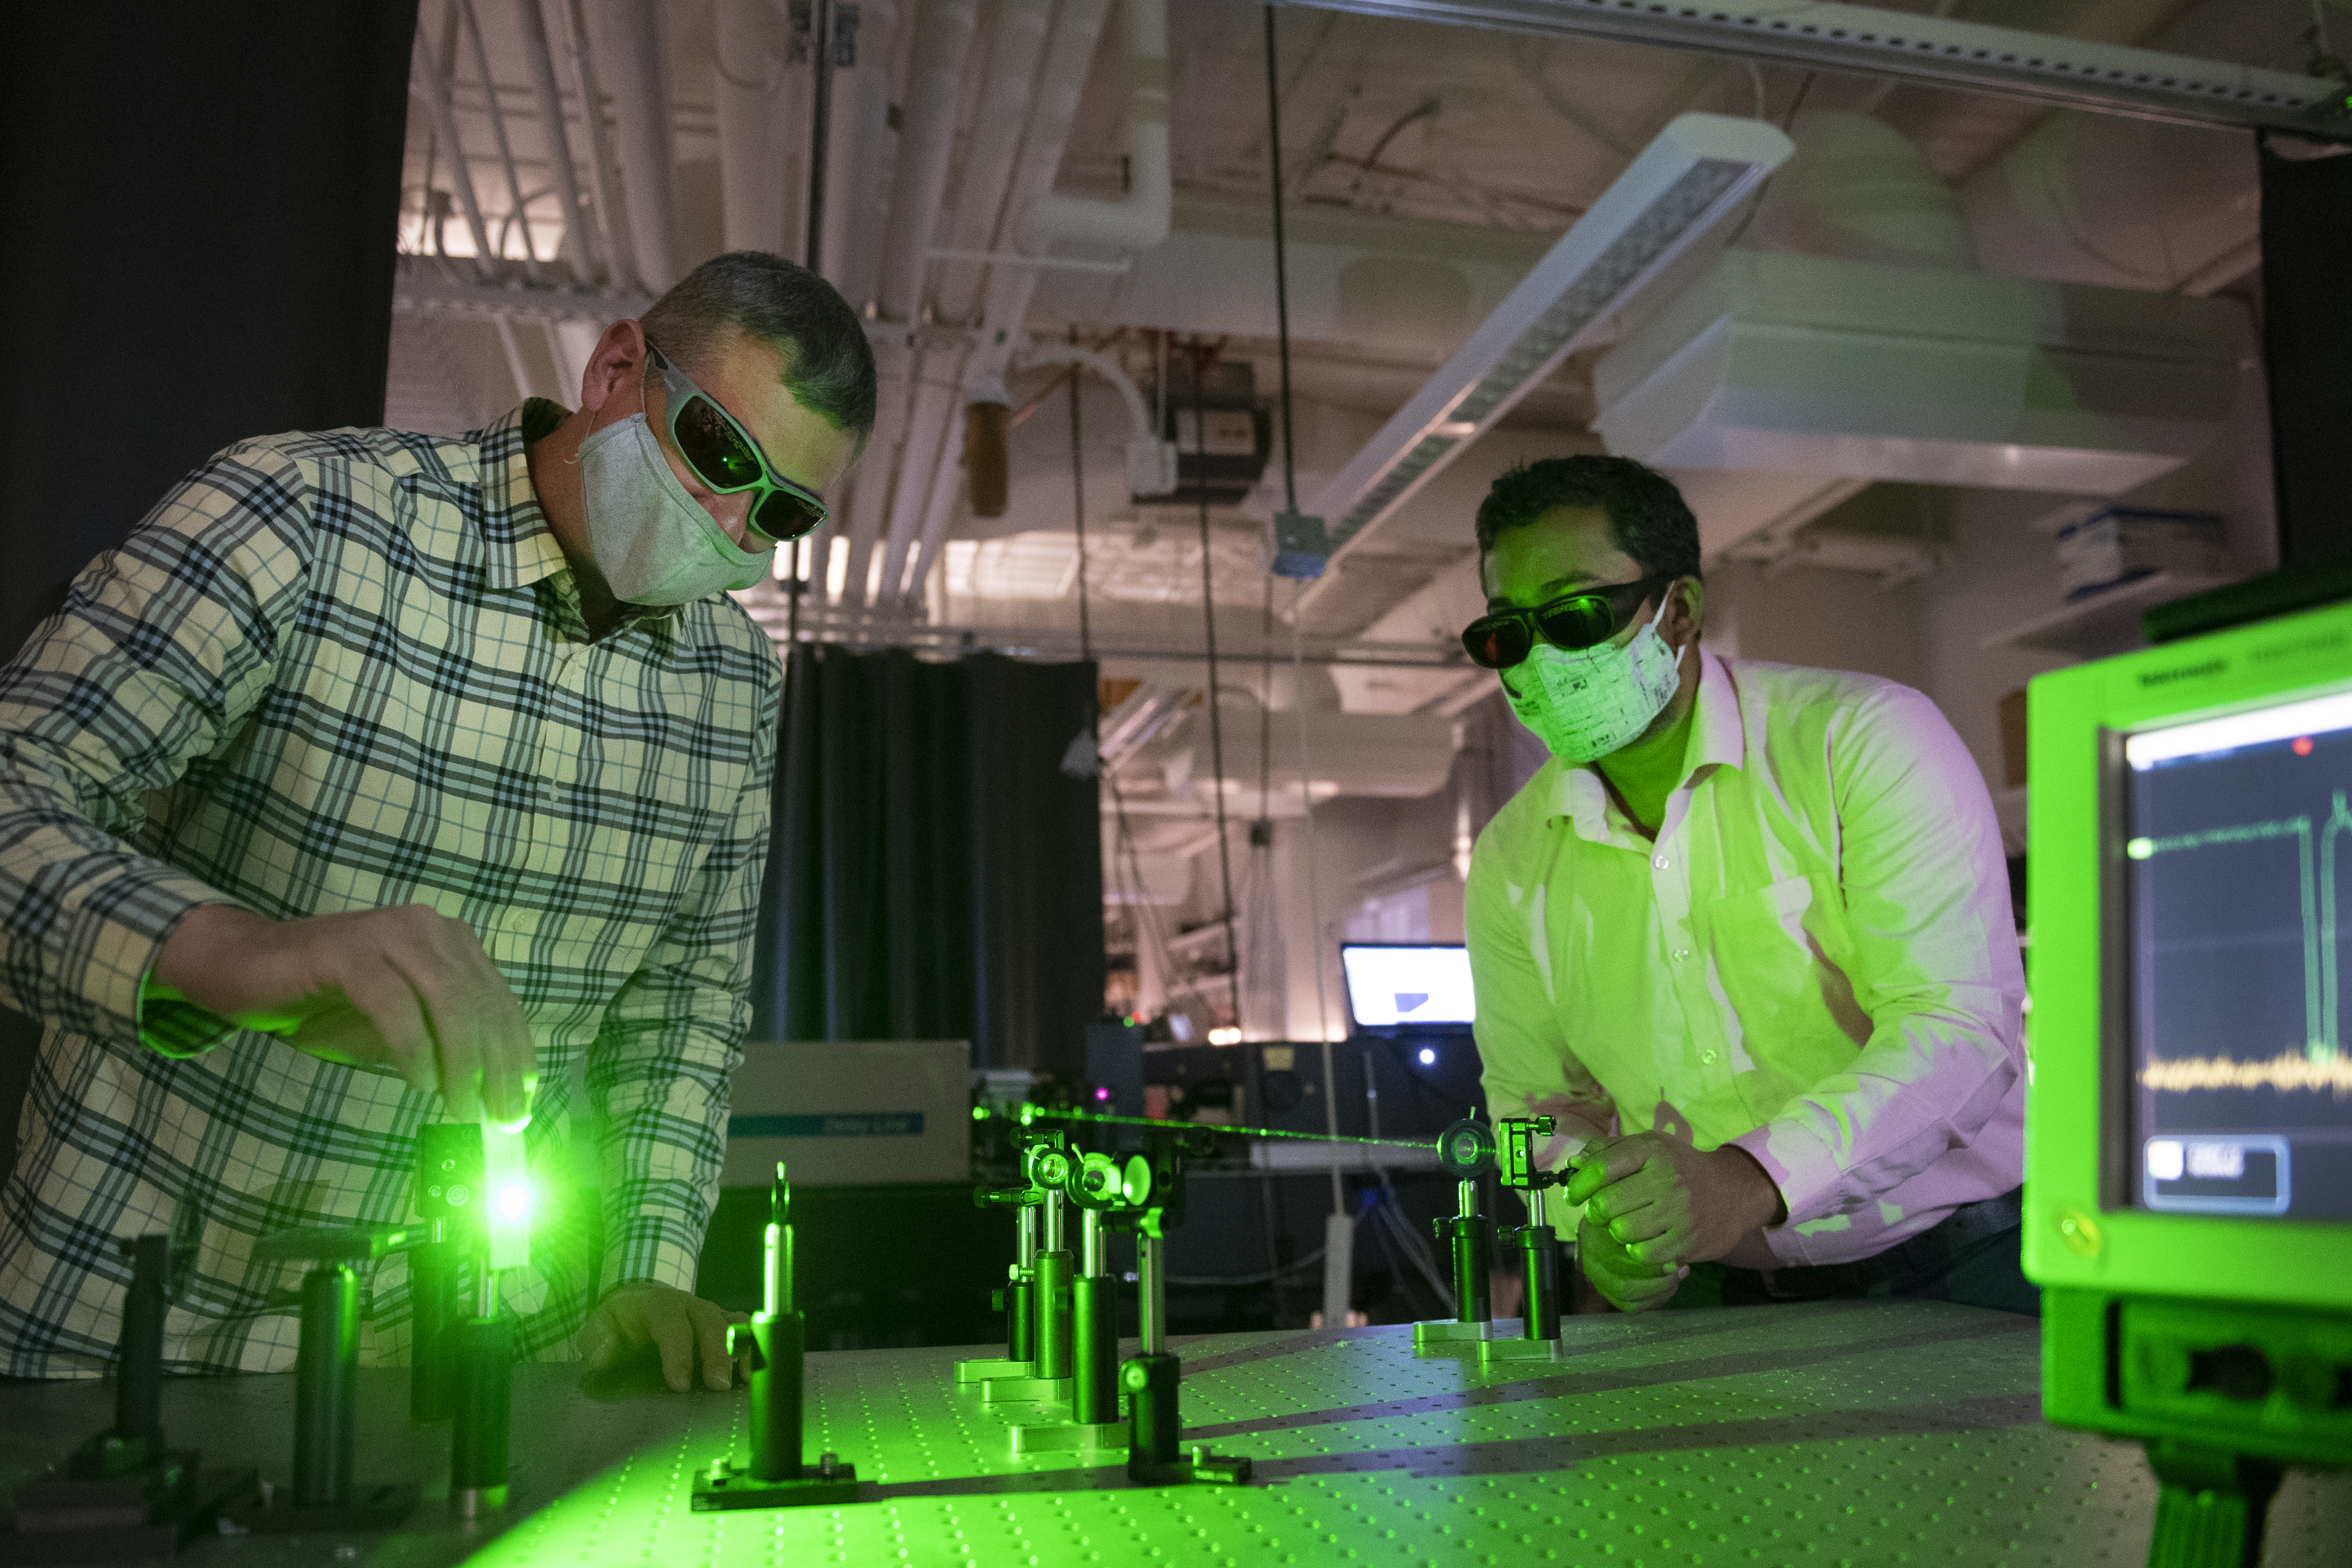 Dr. Nathan Hammer and his student working with laser equipment